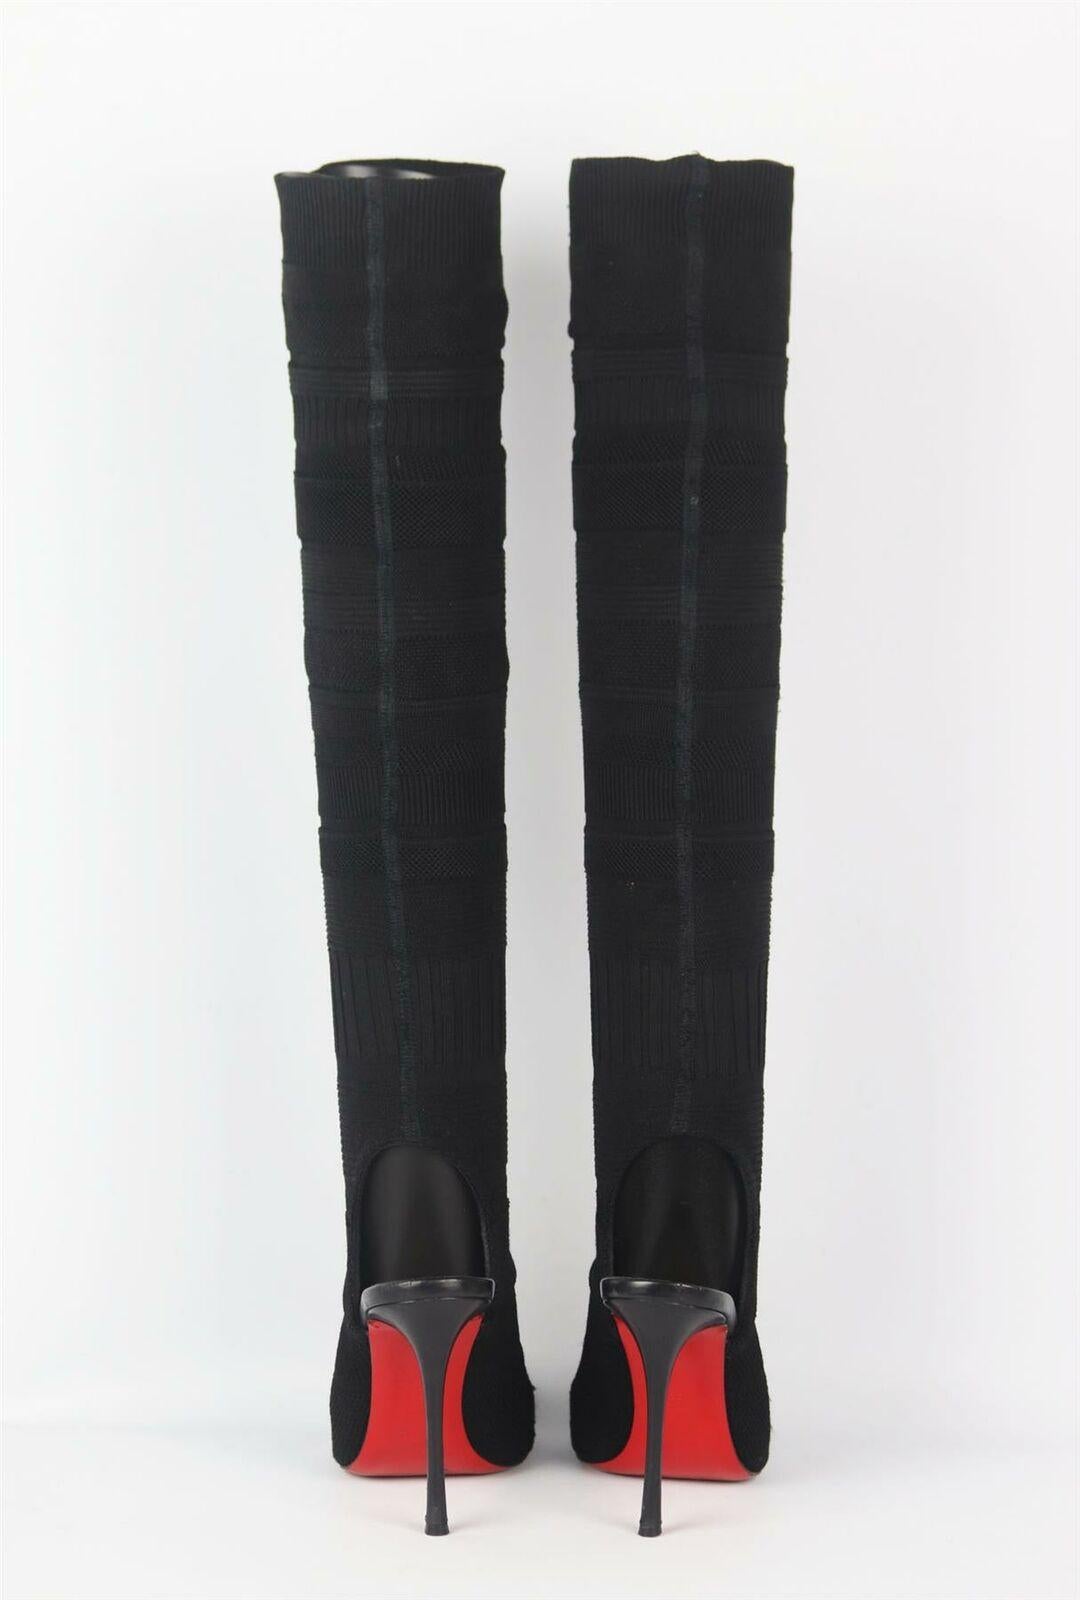 Christian Louboutin Knee High Cutout Stretch Knit Boots In Good Condition In London, GB